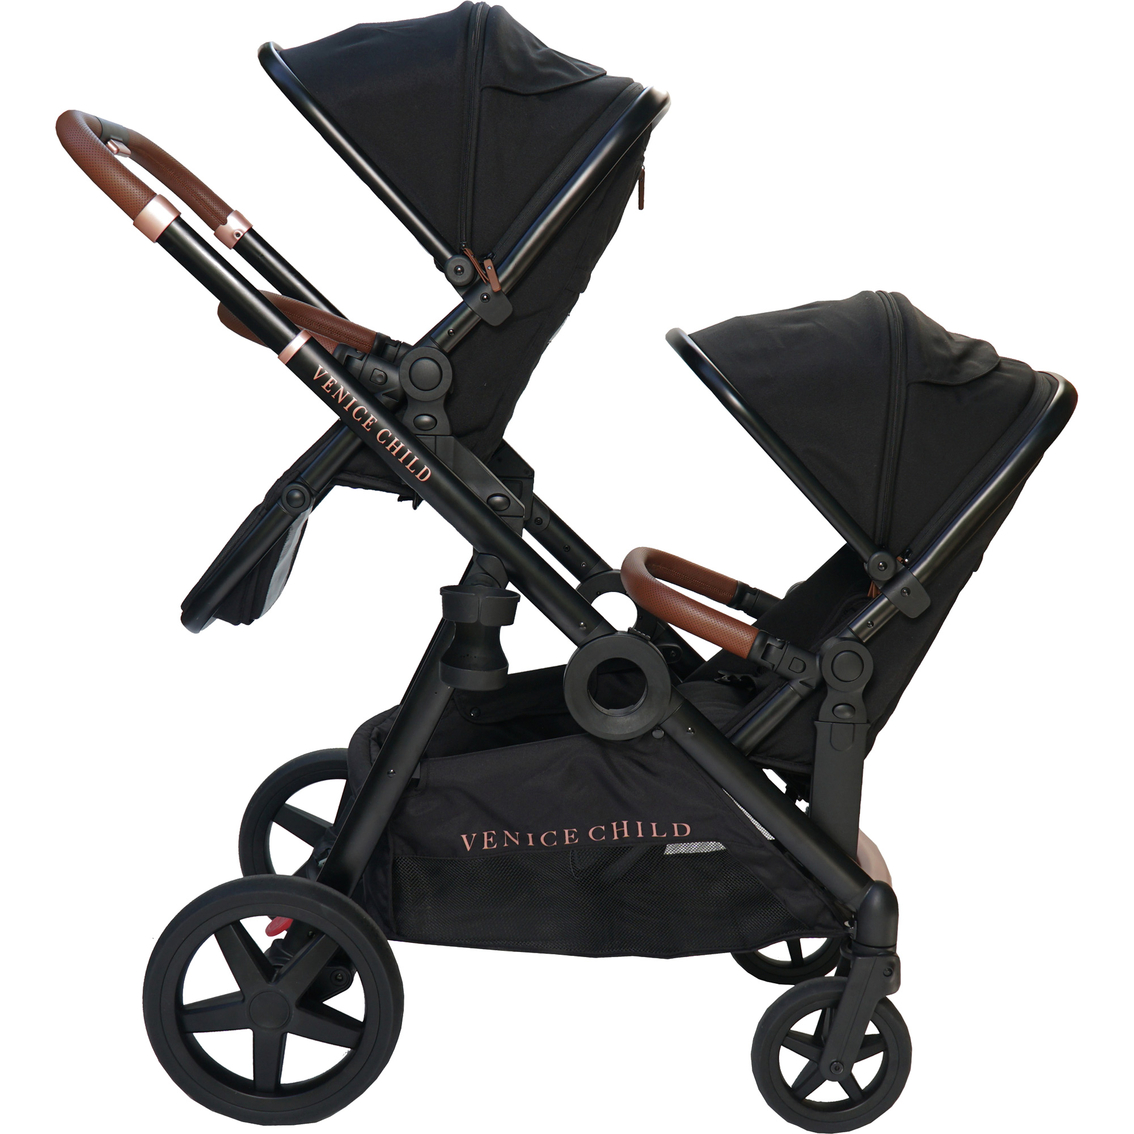 Venice Child Maverick Stroller and 2nd Toddler Seat - Image 1 of 10